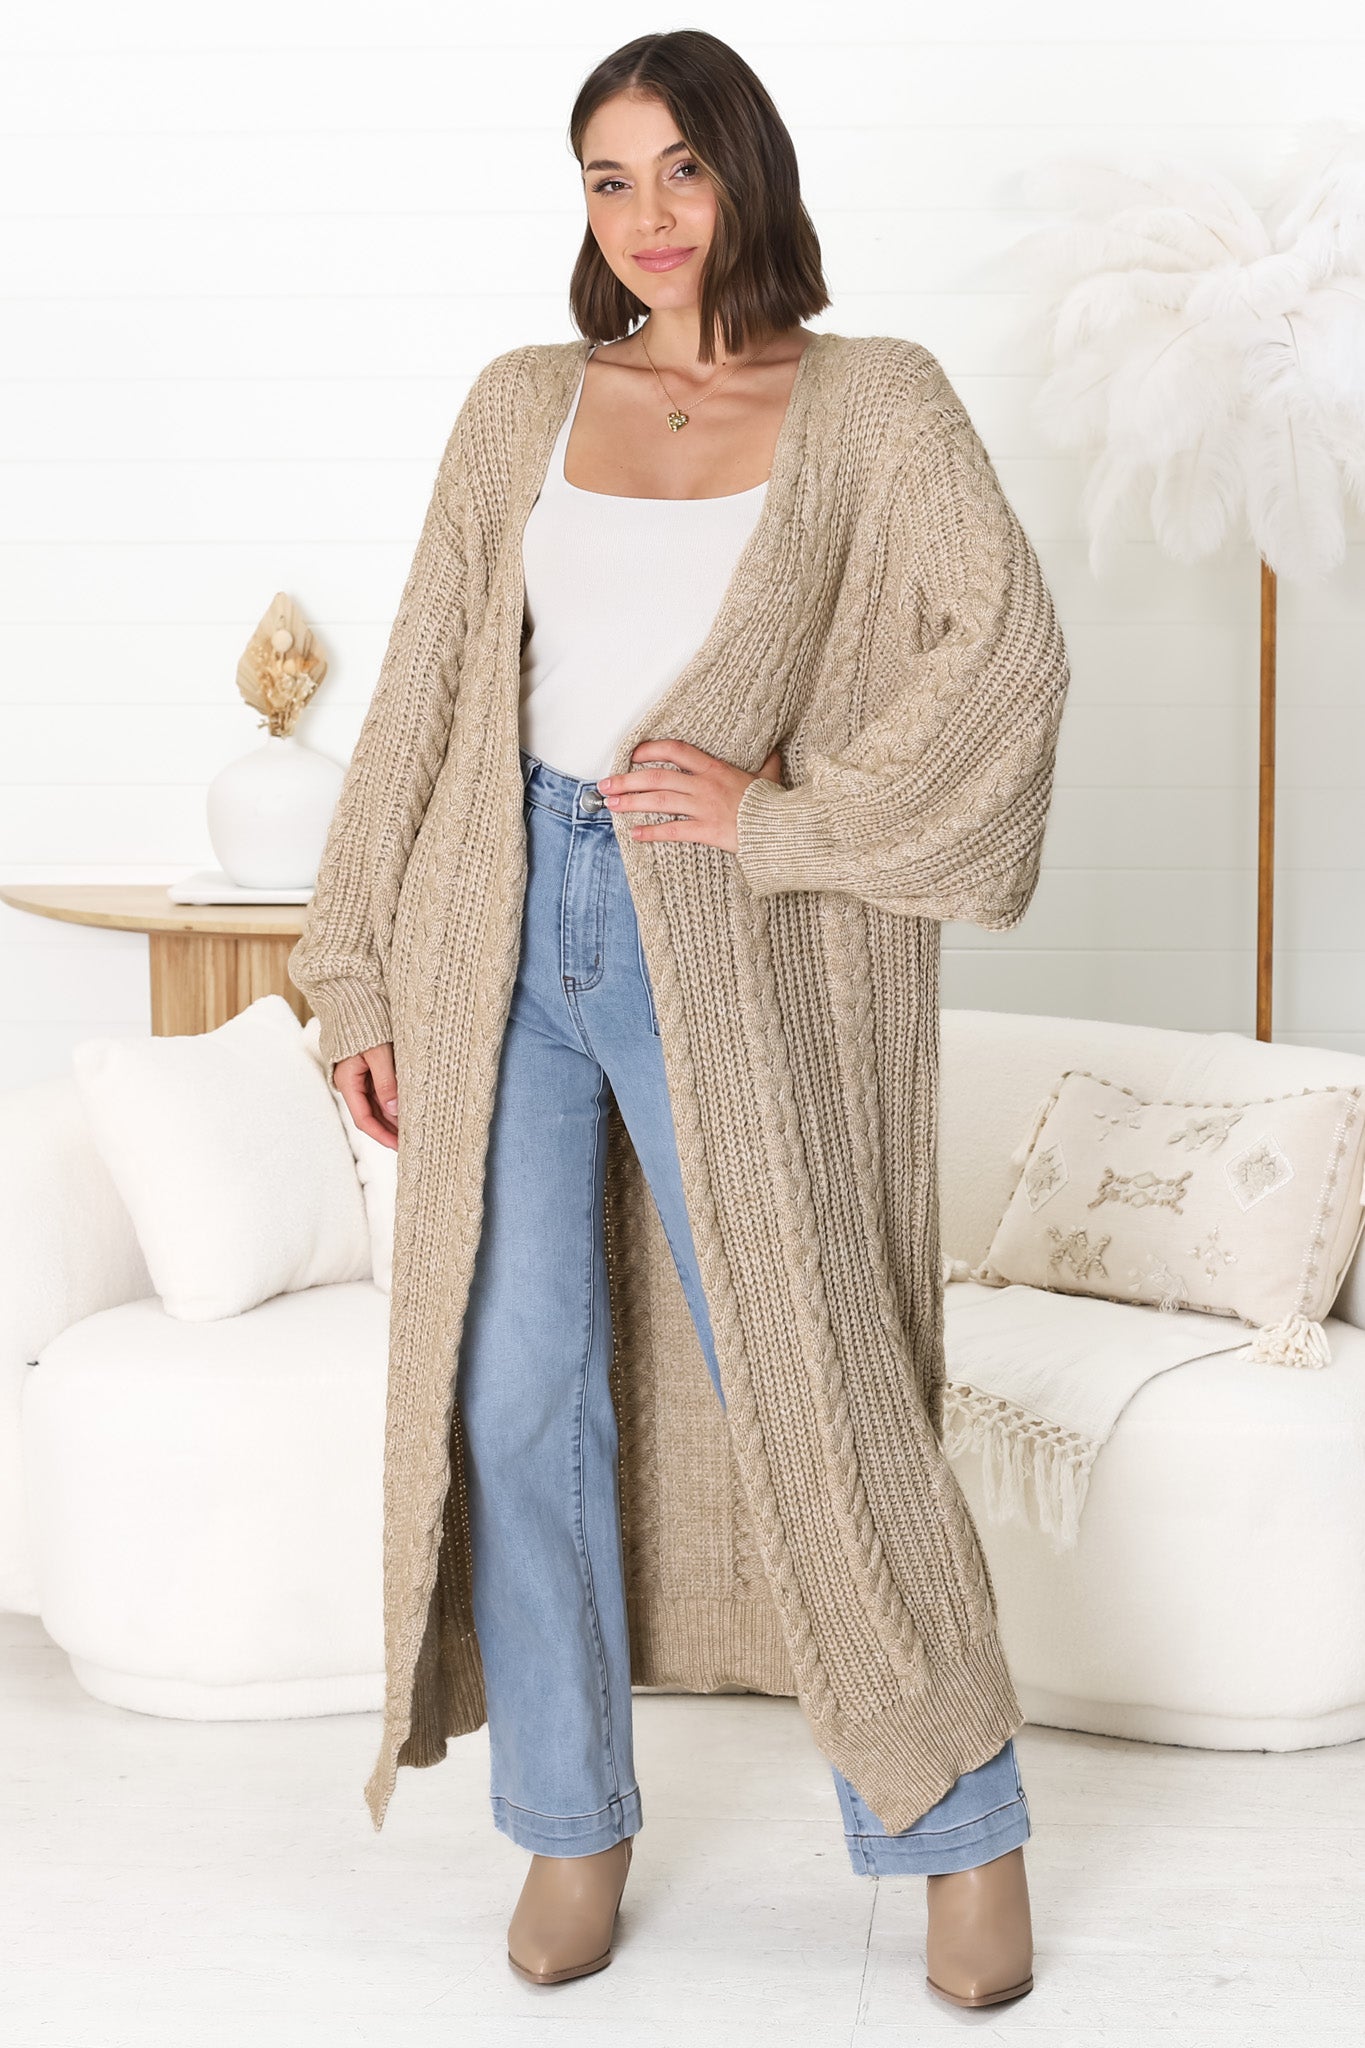 Ginelle Cardigan - Longline Open Front Cable Knit Cardigan in Mocha